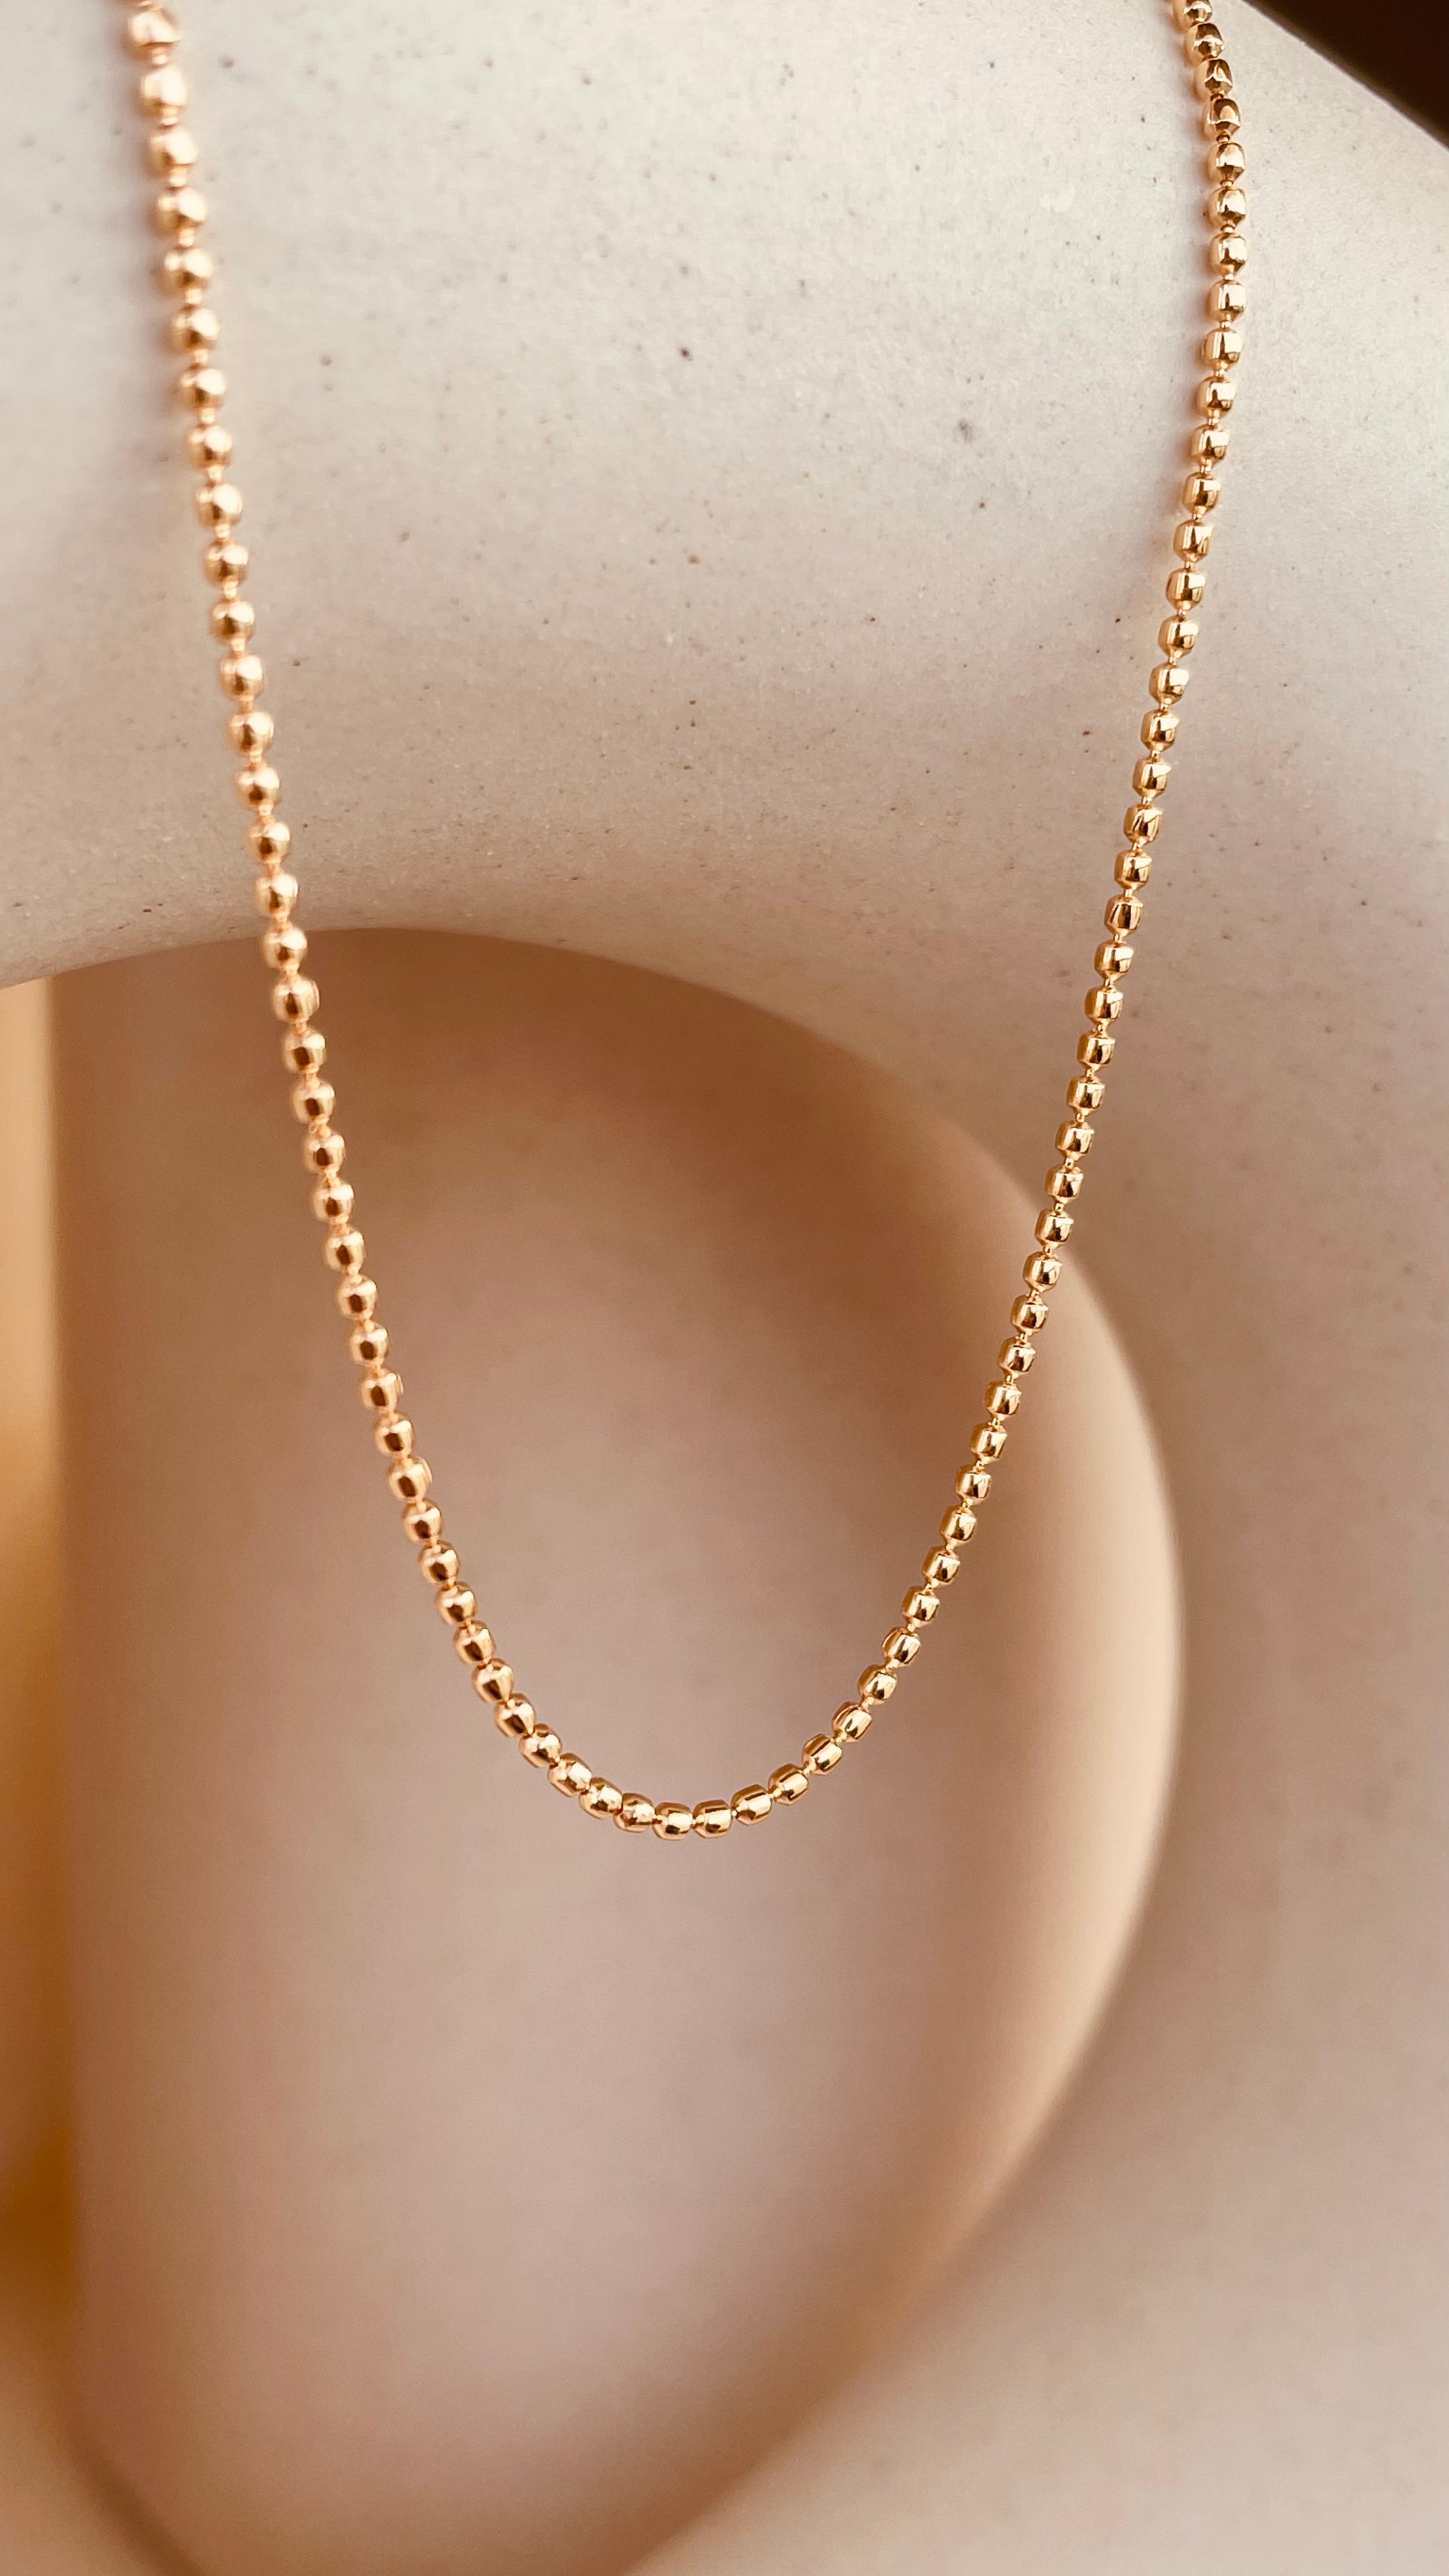 Gold Faceted Beaded Chain Necklace - Octonov 